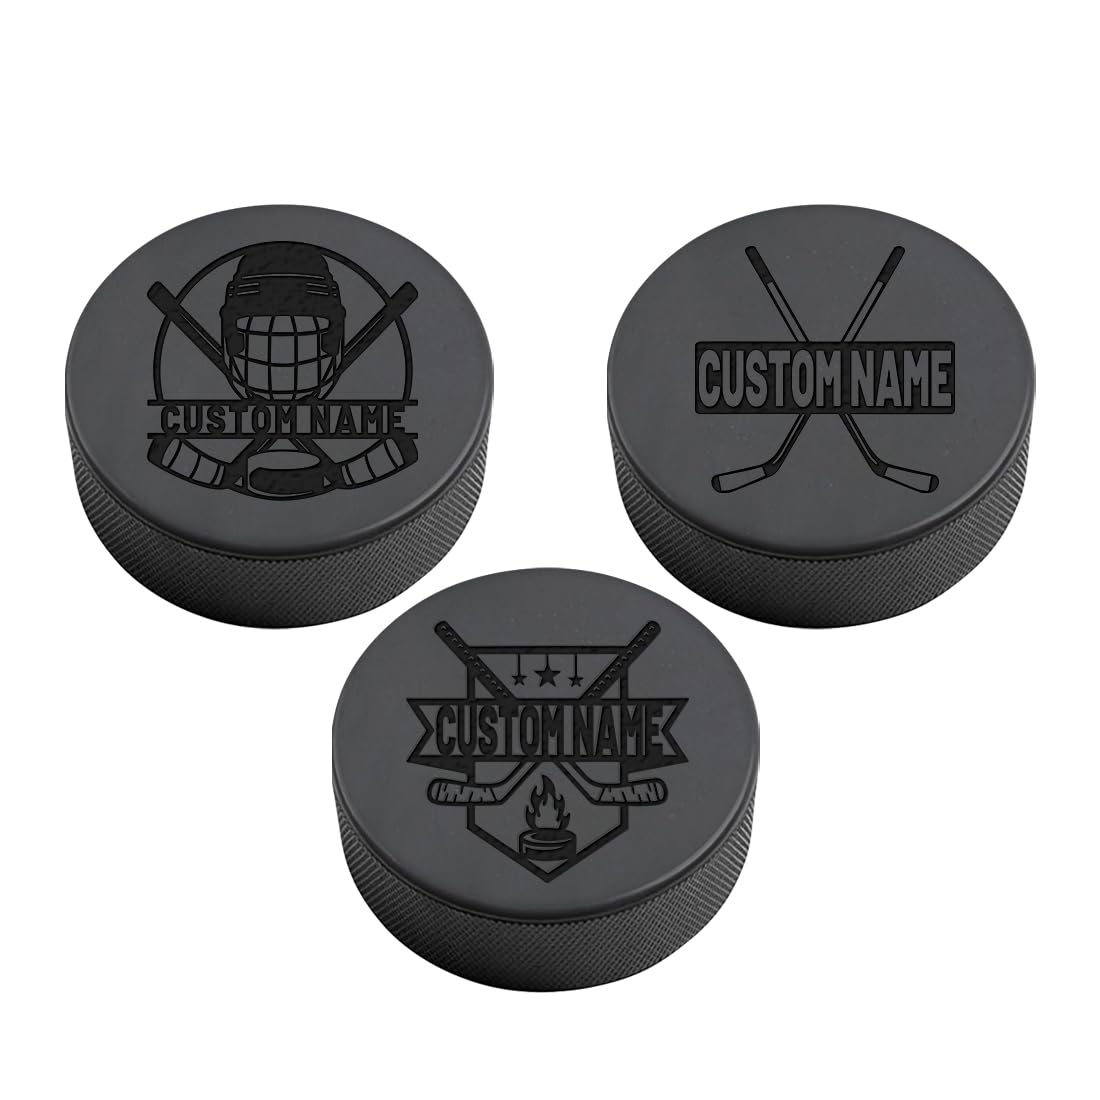 Personalize your game with a custom-engraved hockey puck